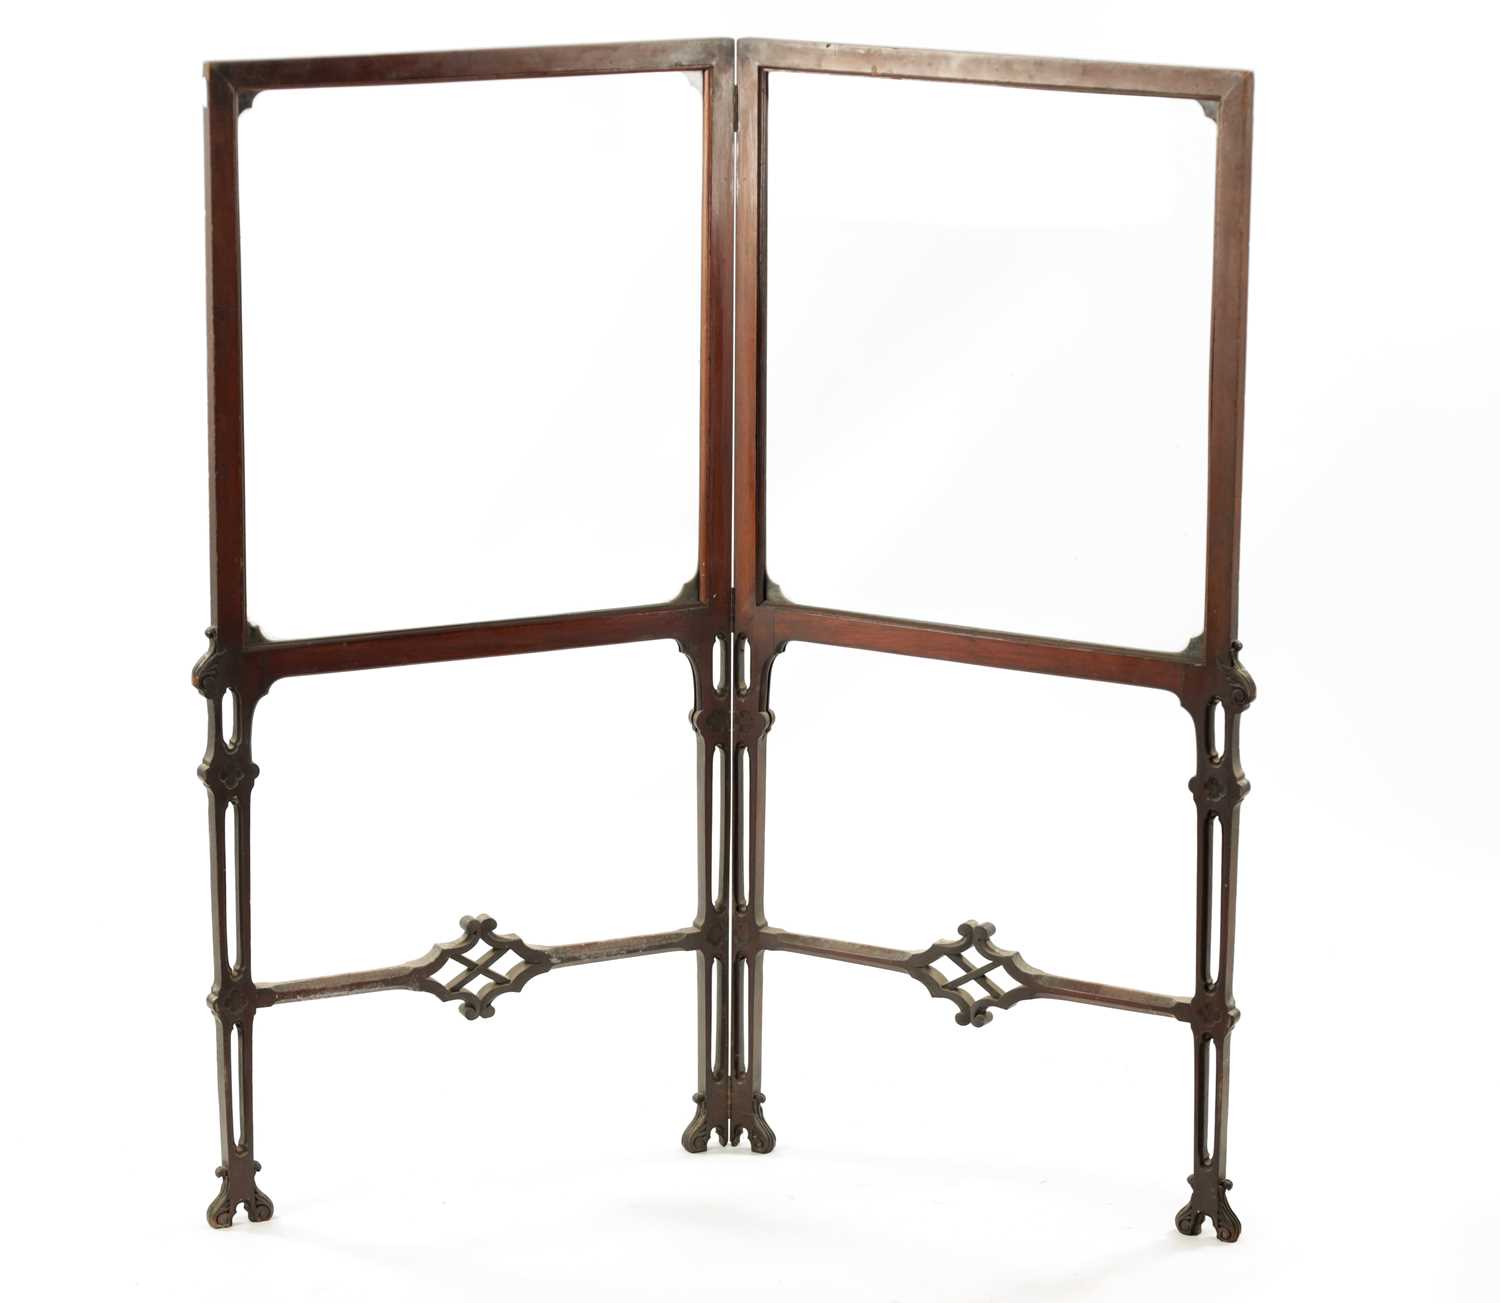 A 19TH CENTURY MAHOGANY CHIPPENDALE STYLE TWO FOLD SCREEN